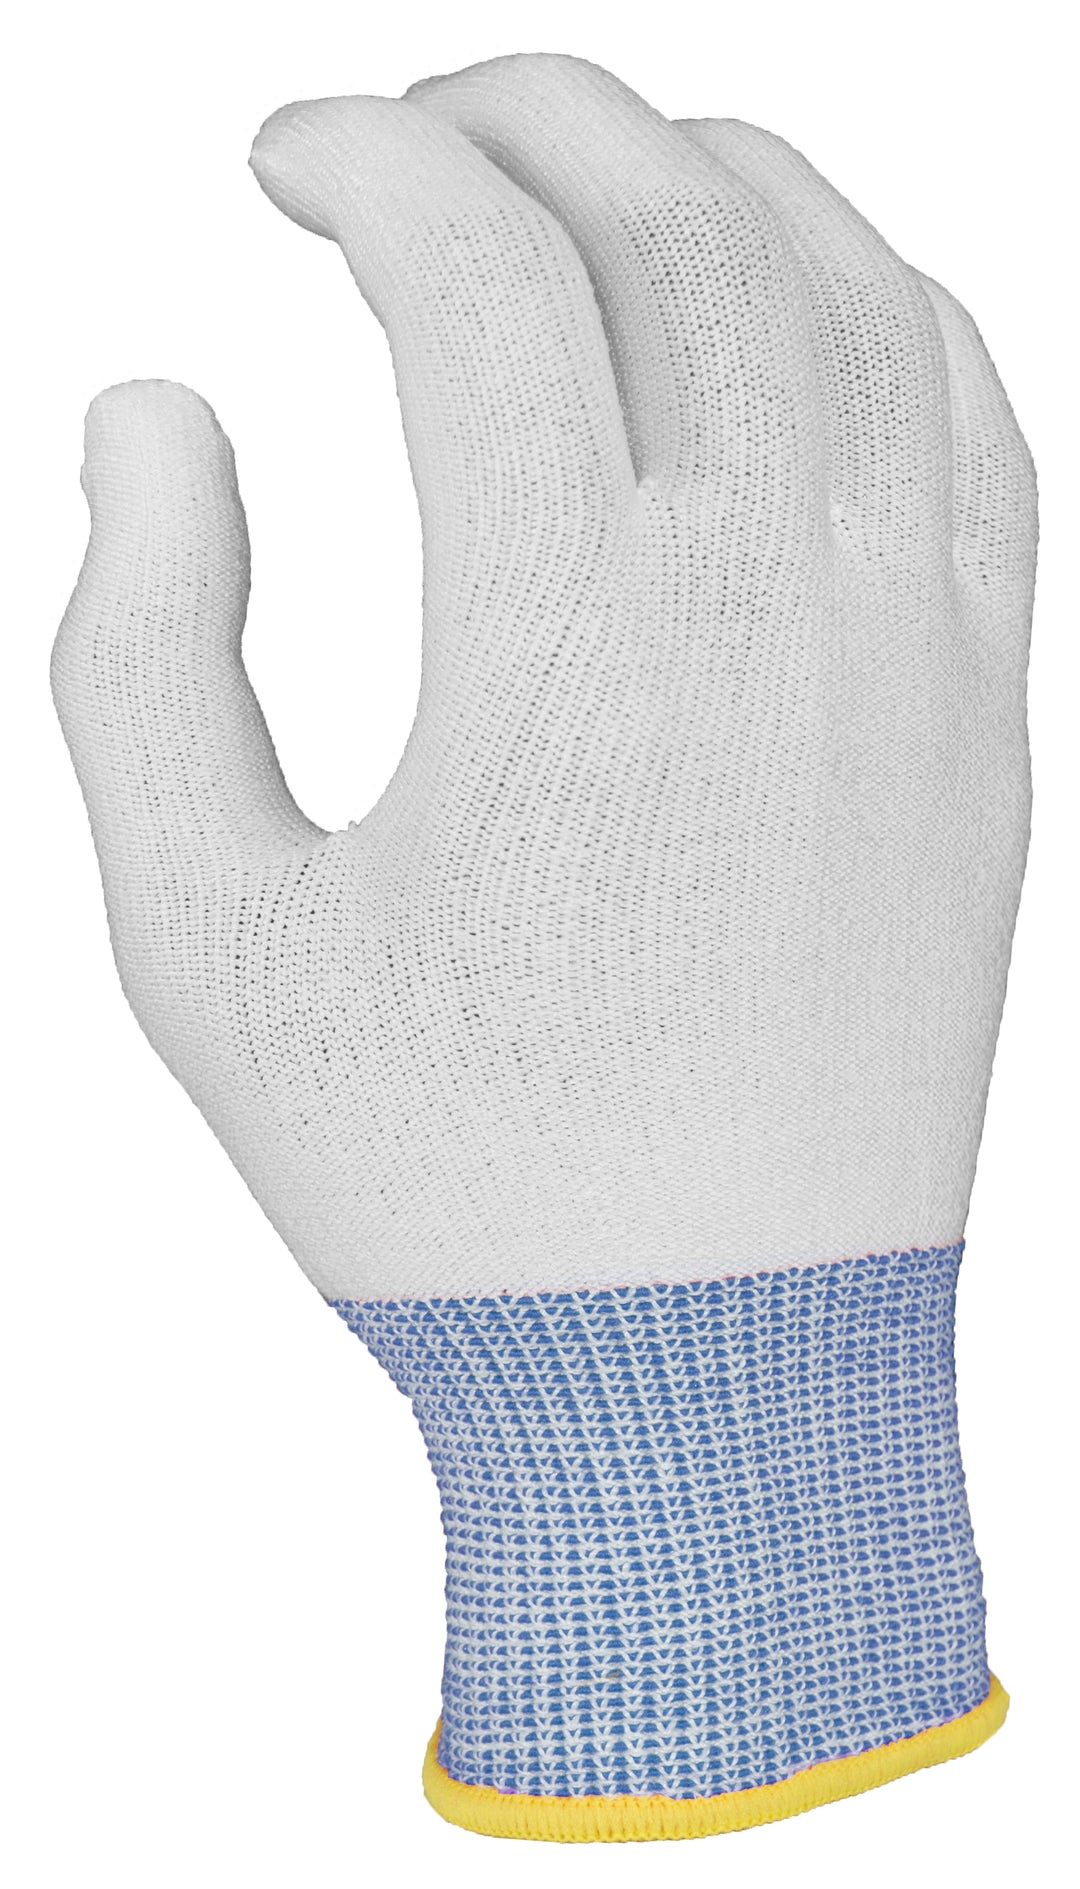 Purus GLFF-CR Pure Touch Cut Resistant Glove Liners 200/CS Small - XL